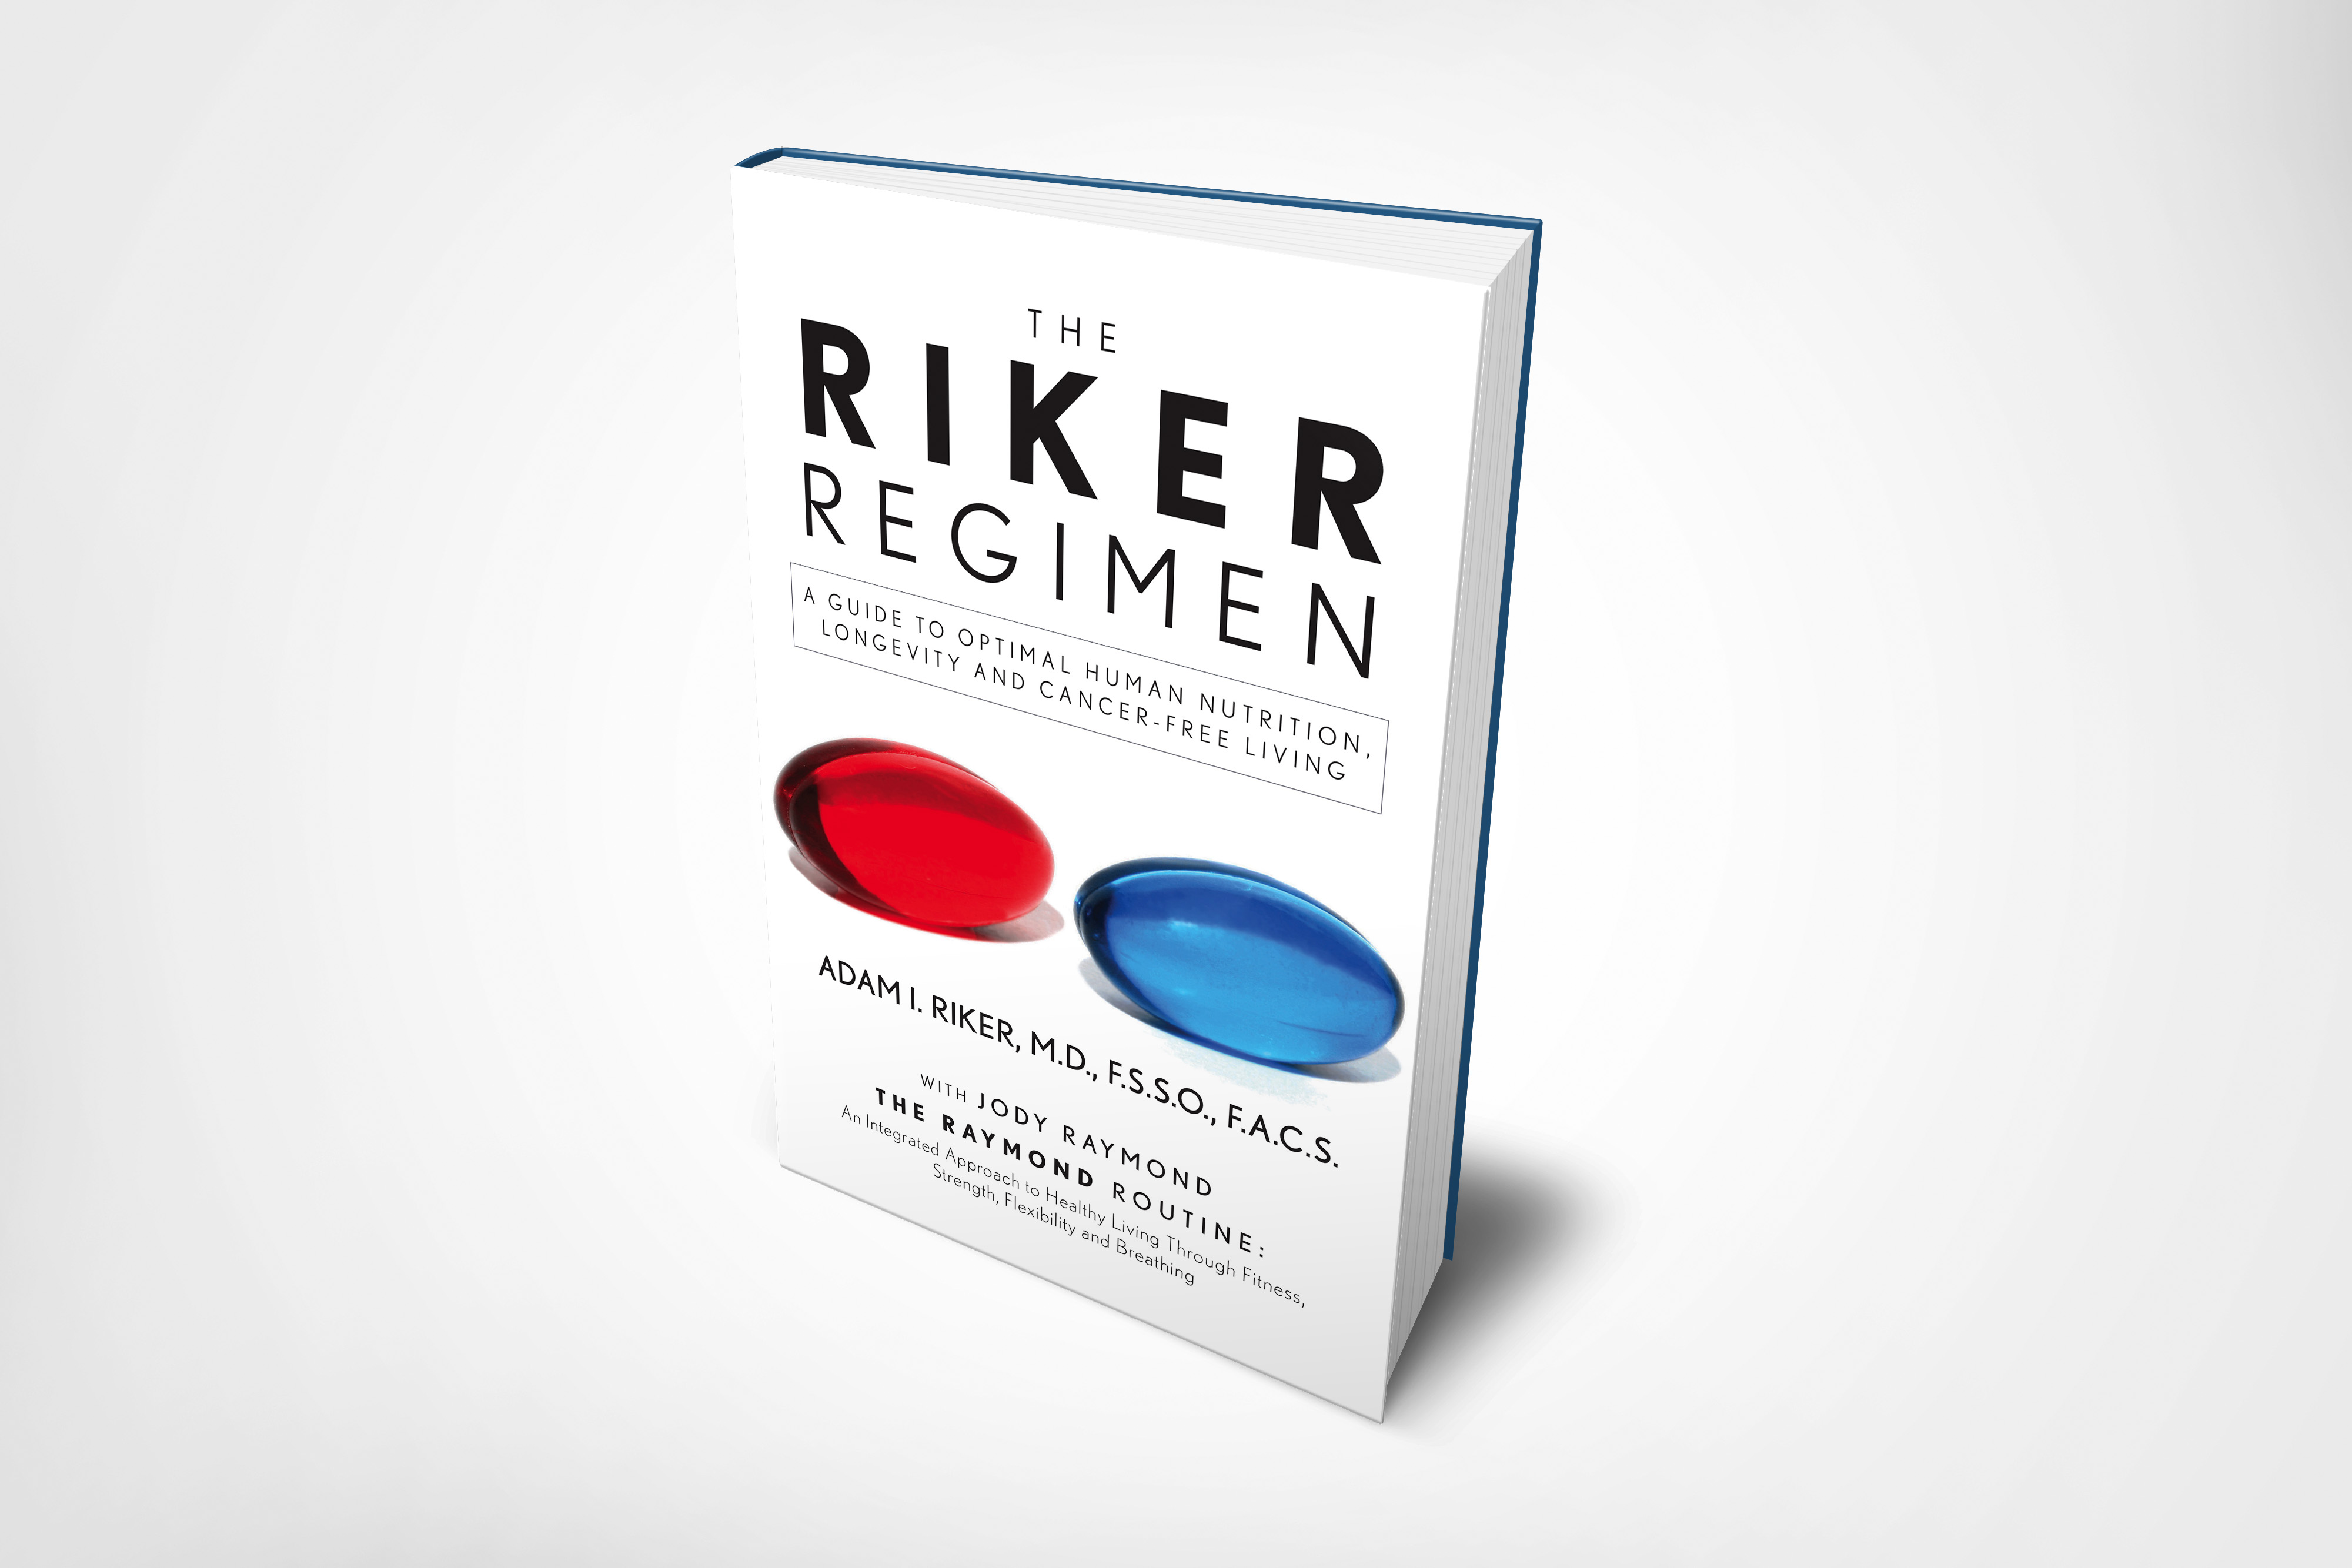 The Riker Regimen: A Guide to Optimal Human Nutrition, Longevity, and Cancer-Free Living